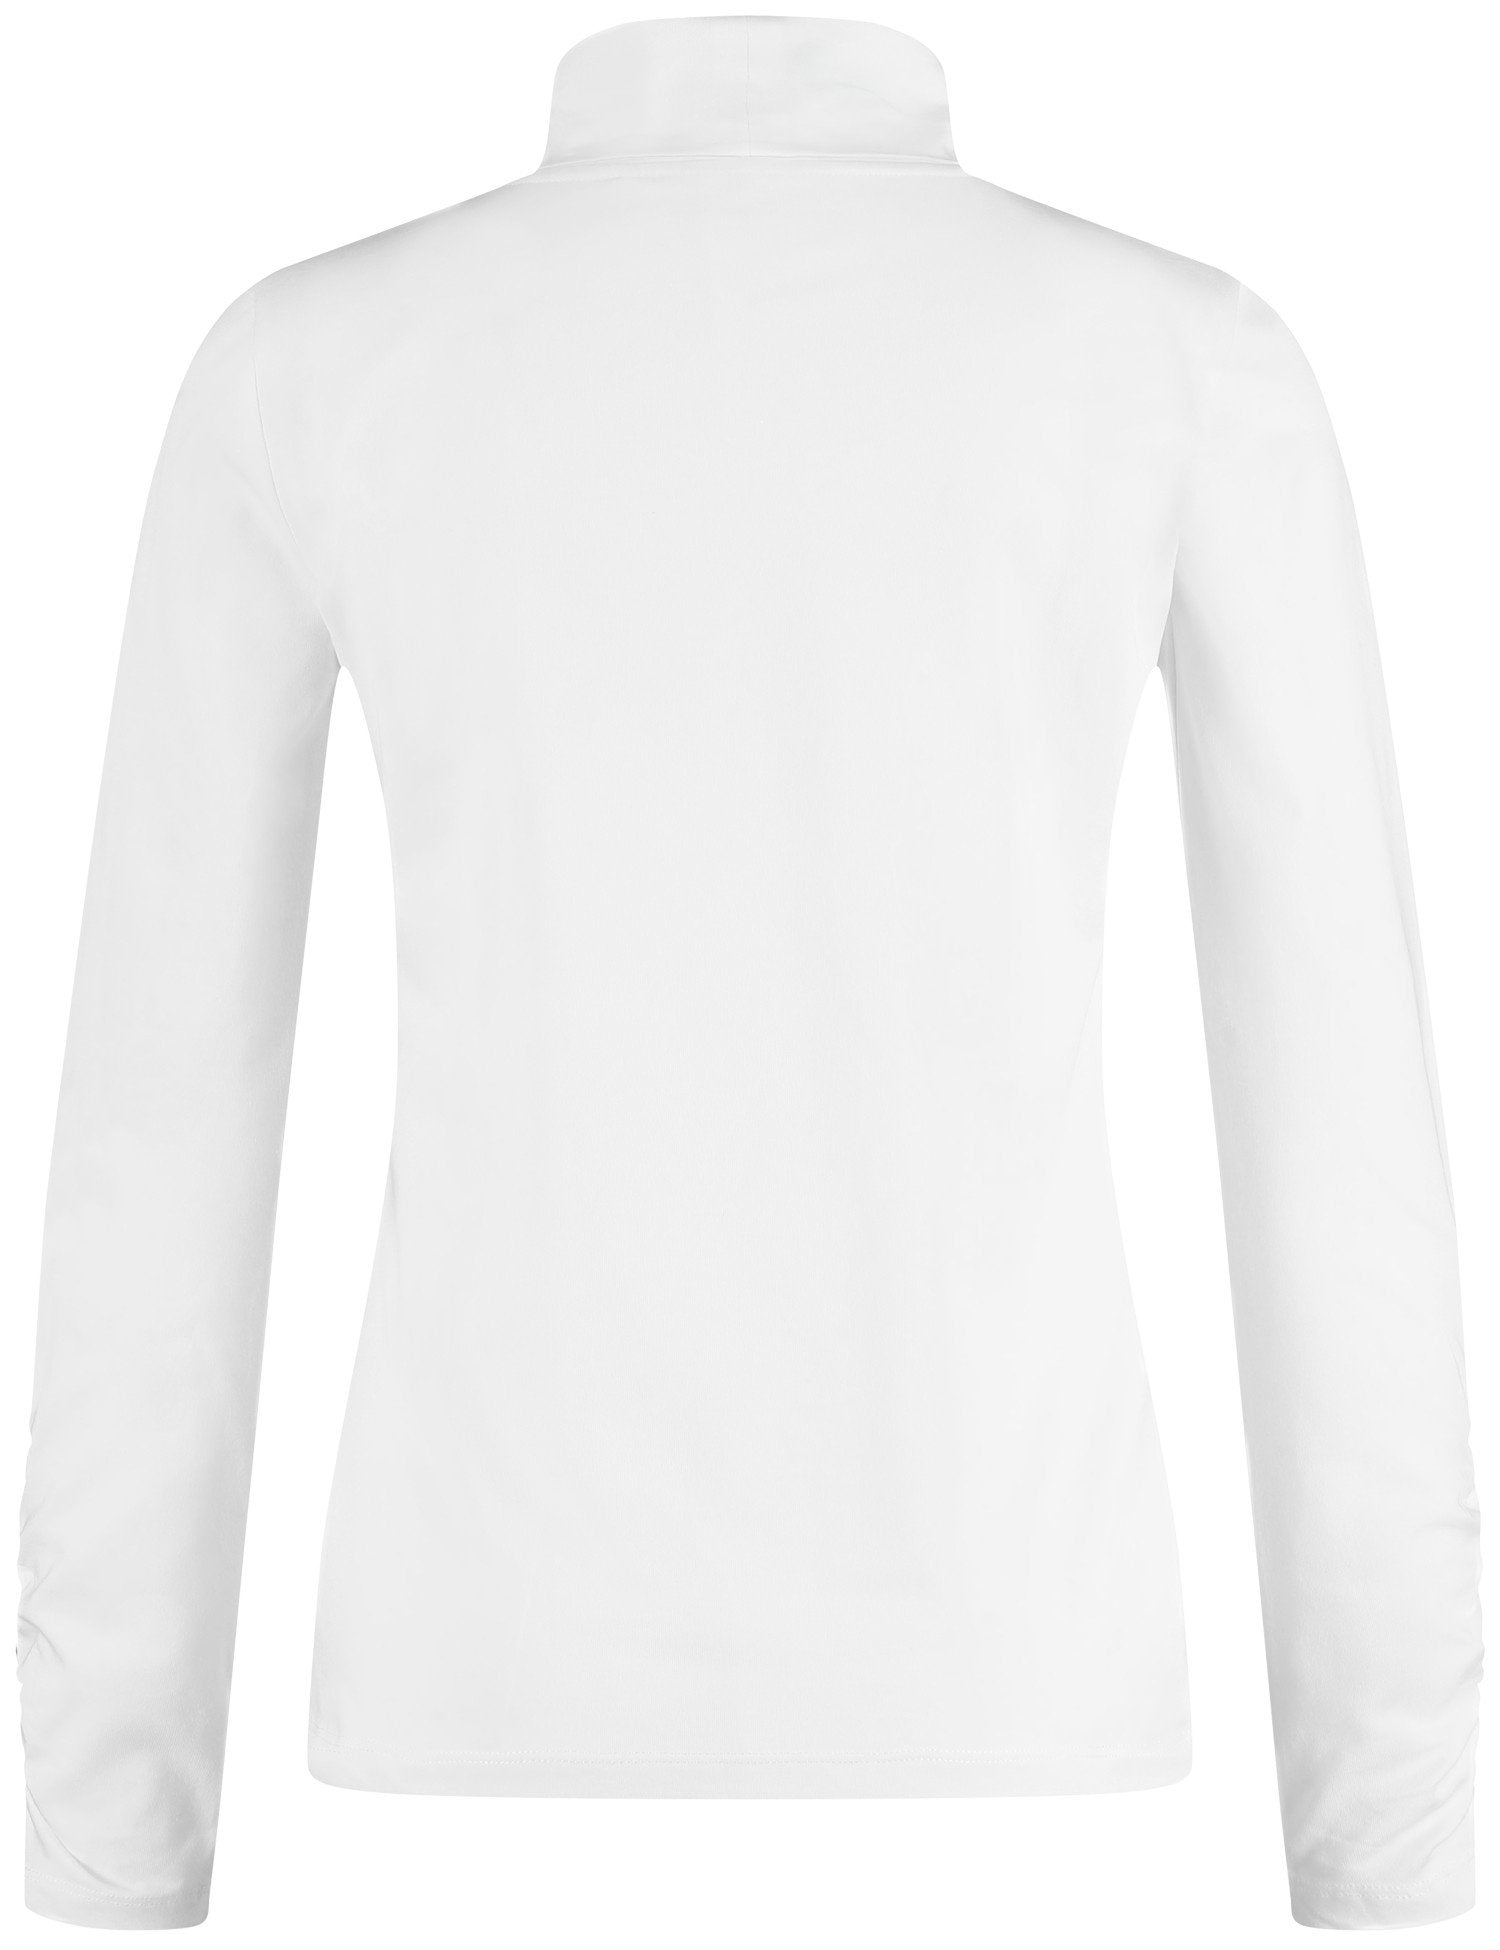 Long Sleeve Top With A Polo Collar And Gathers On The Sleeves_170144-44009_99700_03